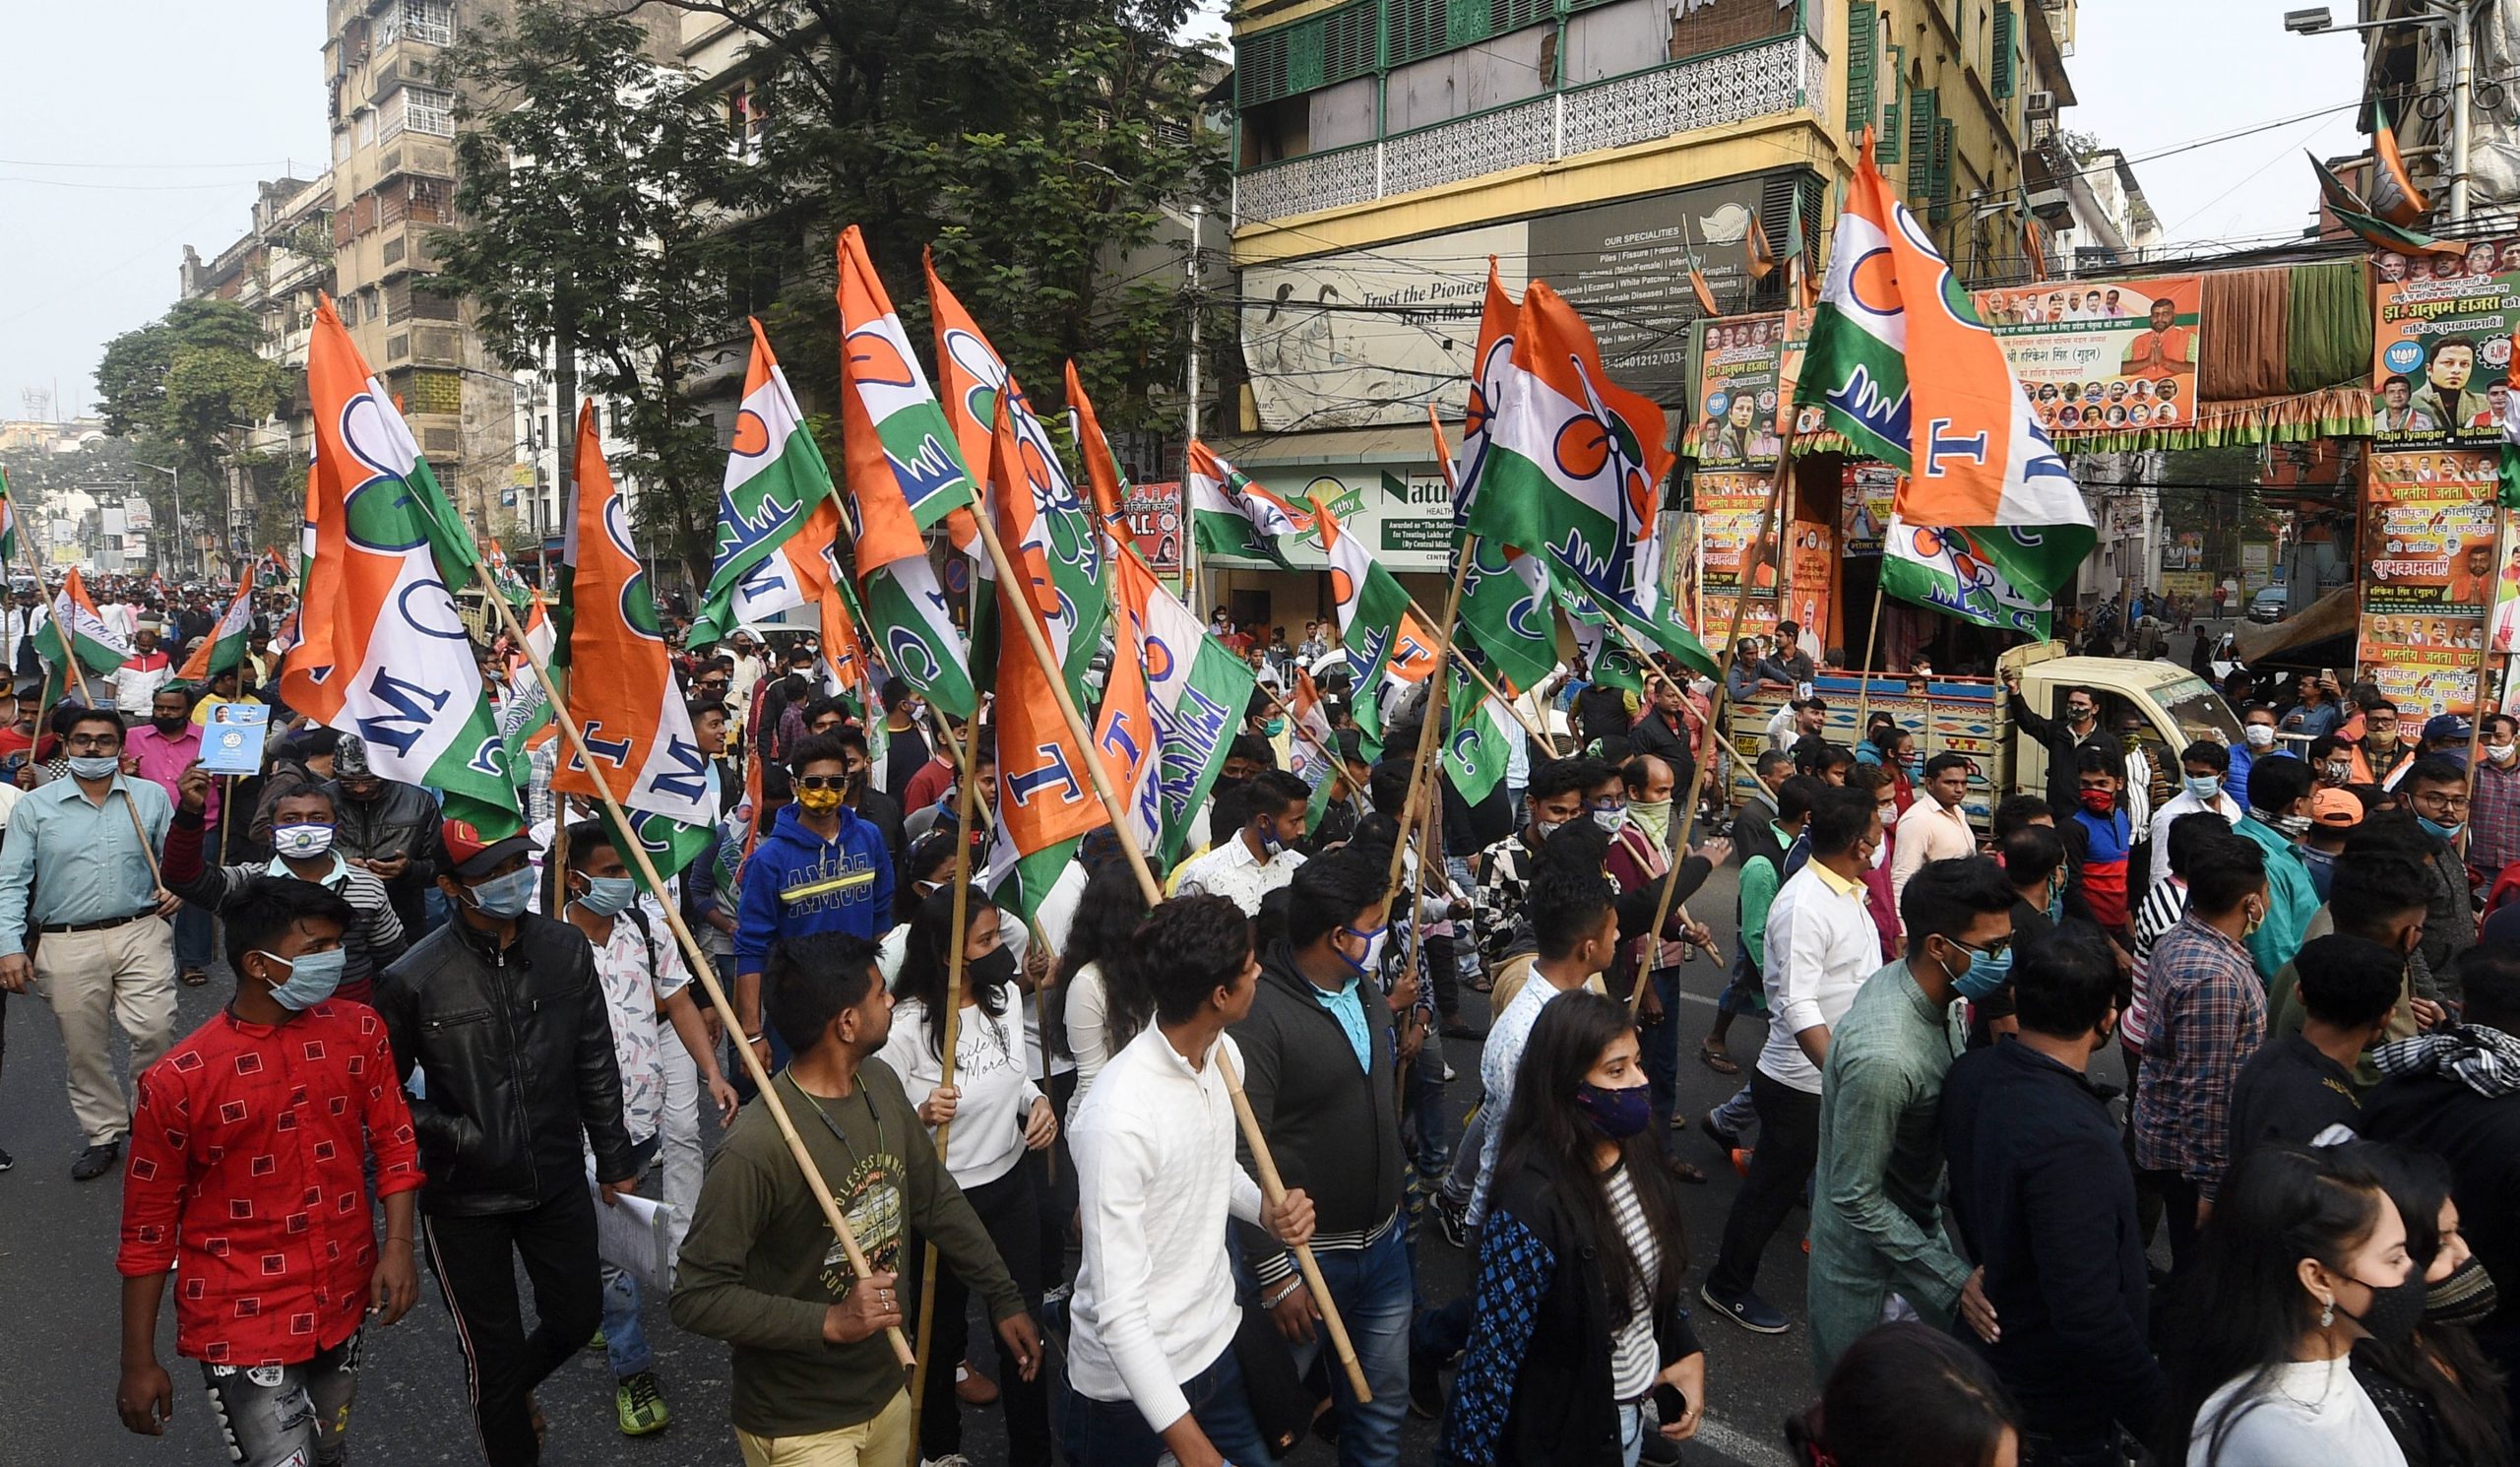 Ausgram constituency picked a TMC candidate in 2016 Bengal polls